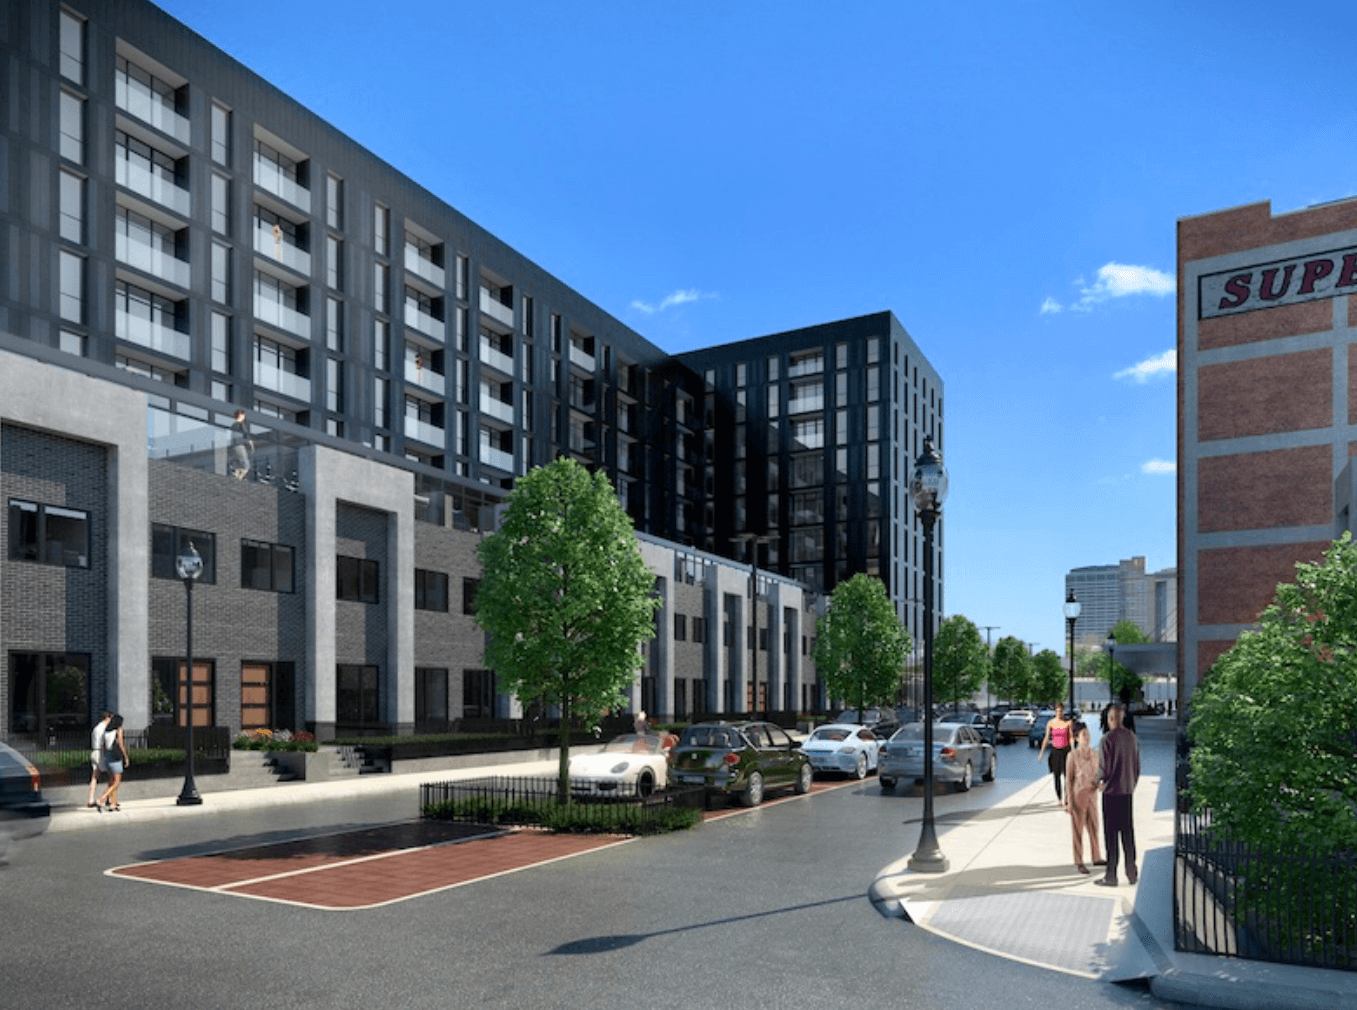 Lux Living Takes Over Freight House Village, Plans 250-Unit Apartment Project